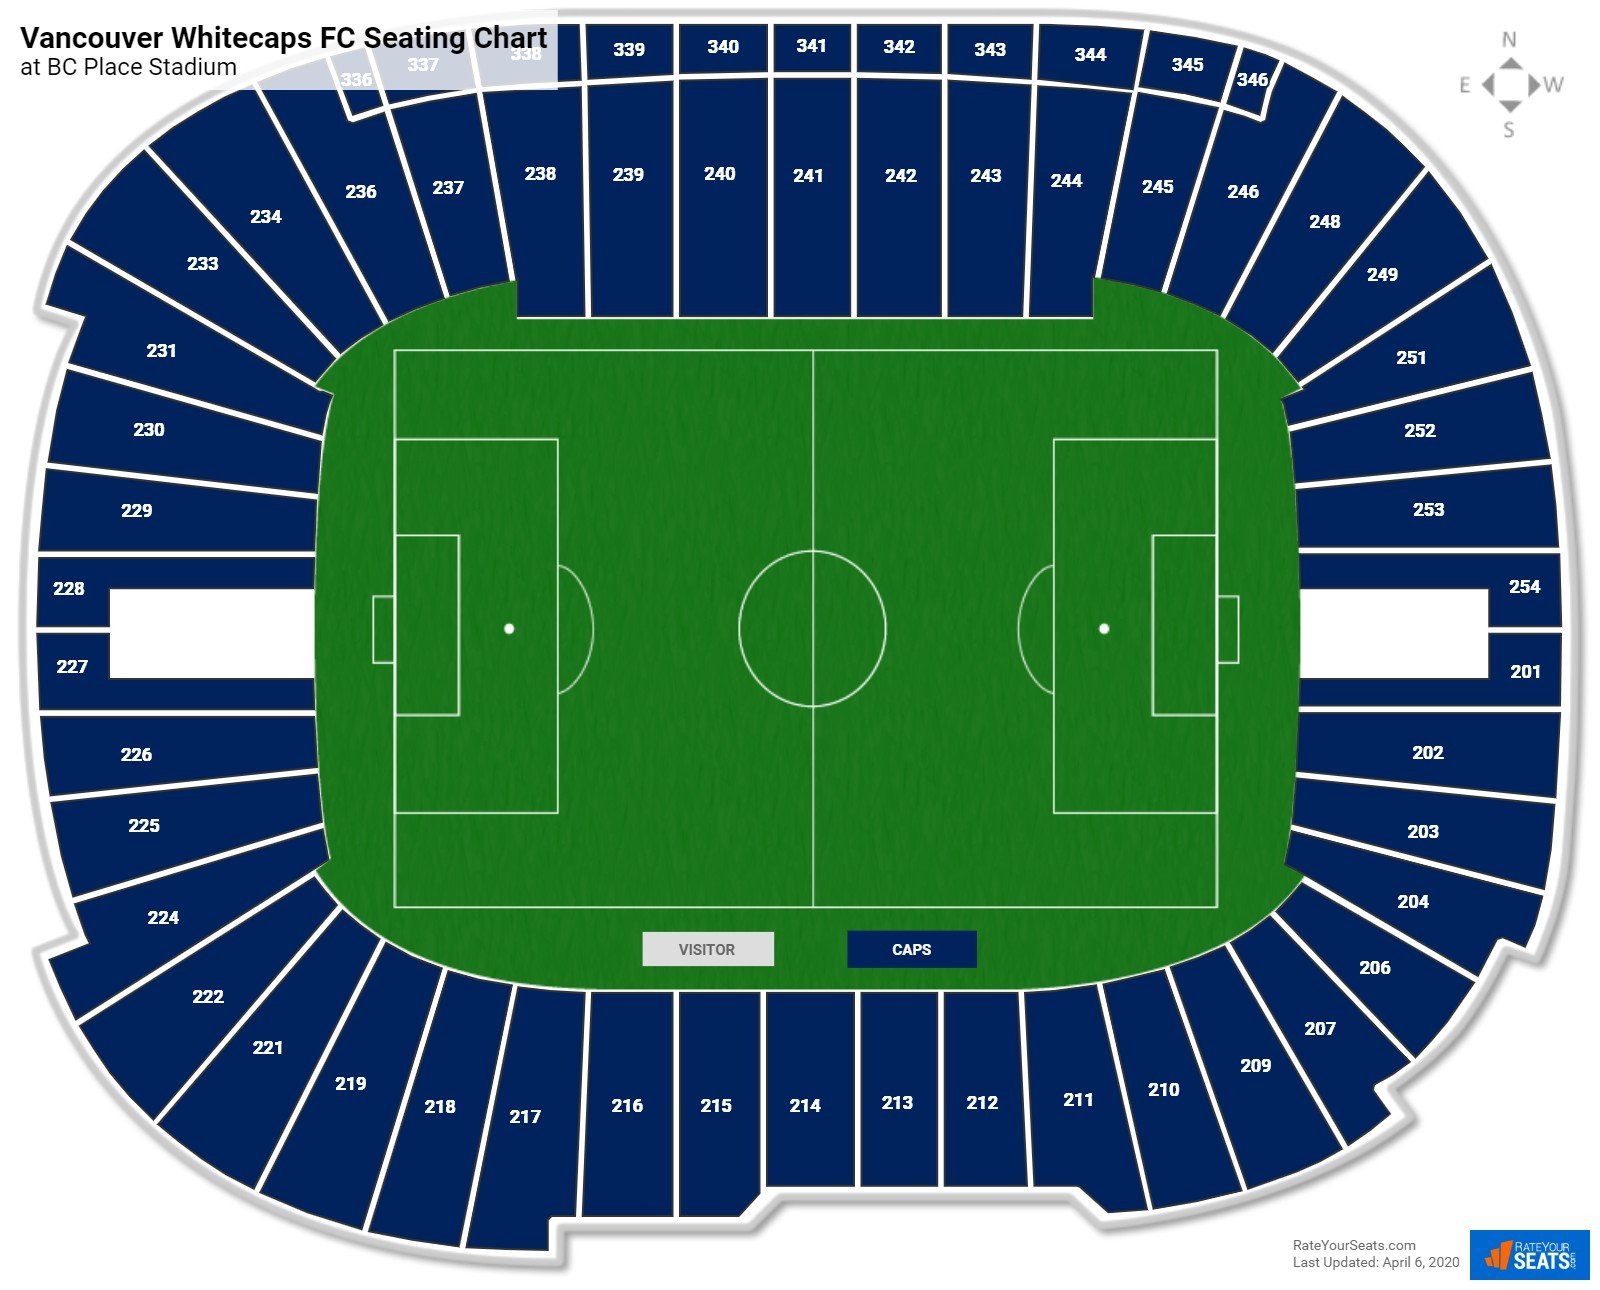 Vancouver Whitecaps Fc Seating Charts At Bc Place Stadium Rateyourseats Com